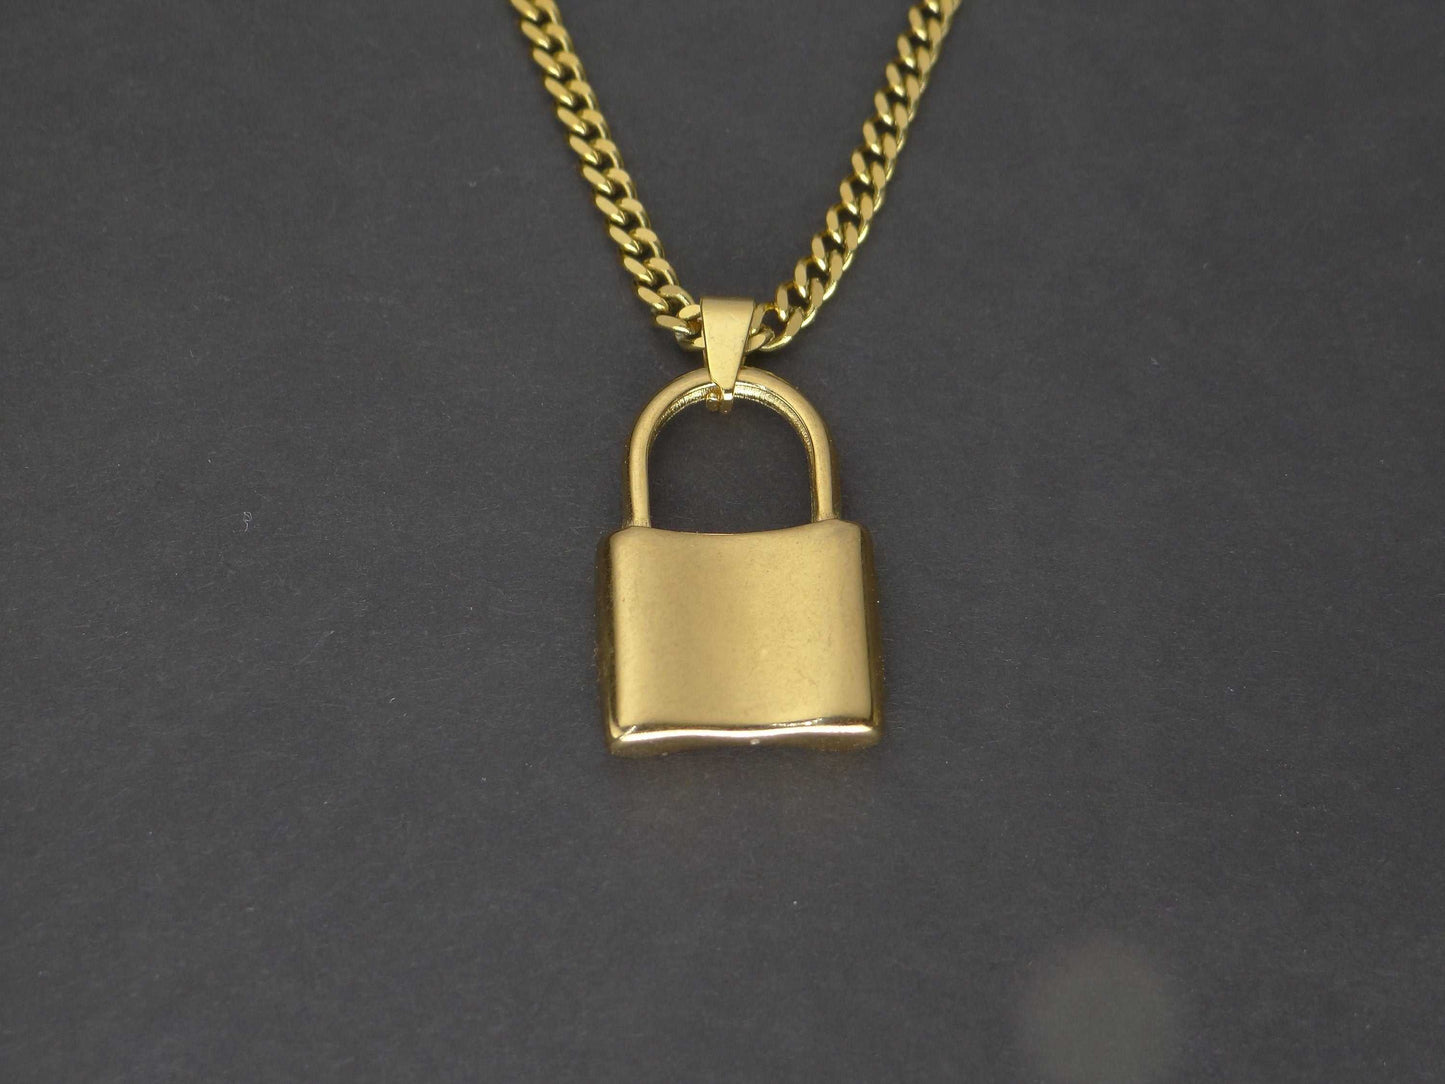 CRW Lock Necklace with 3mm miami cuban link chain in gold - Latch Necklaces for Women - Hip Hop Necklace for Men - Necklace with Pendant